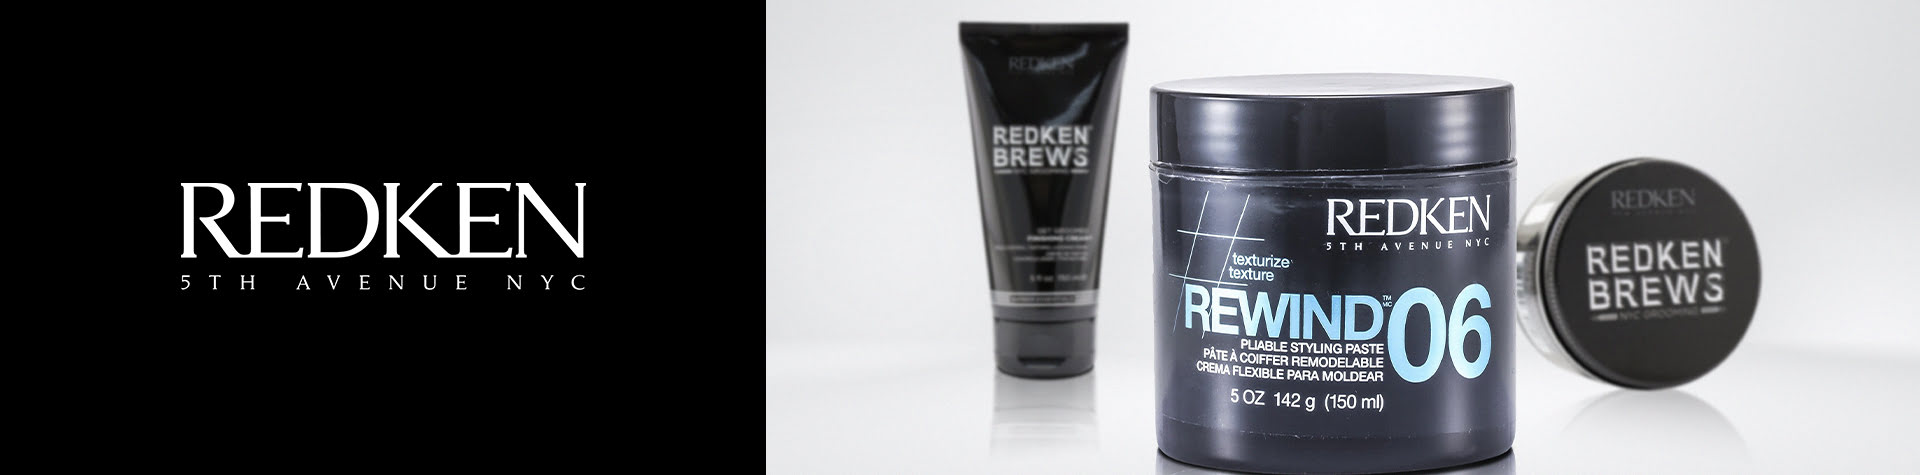 redken hair products online